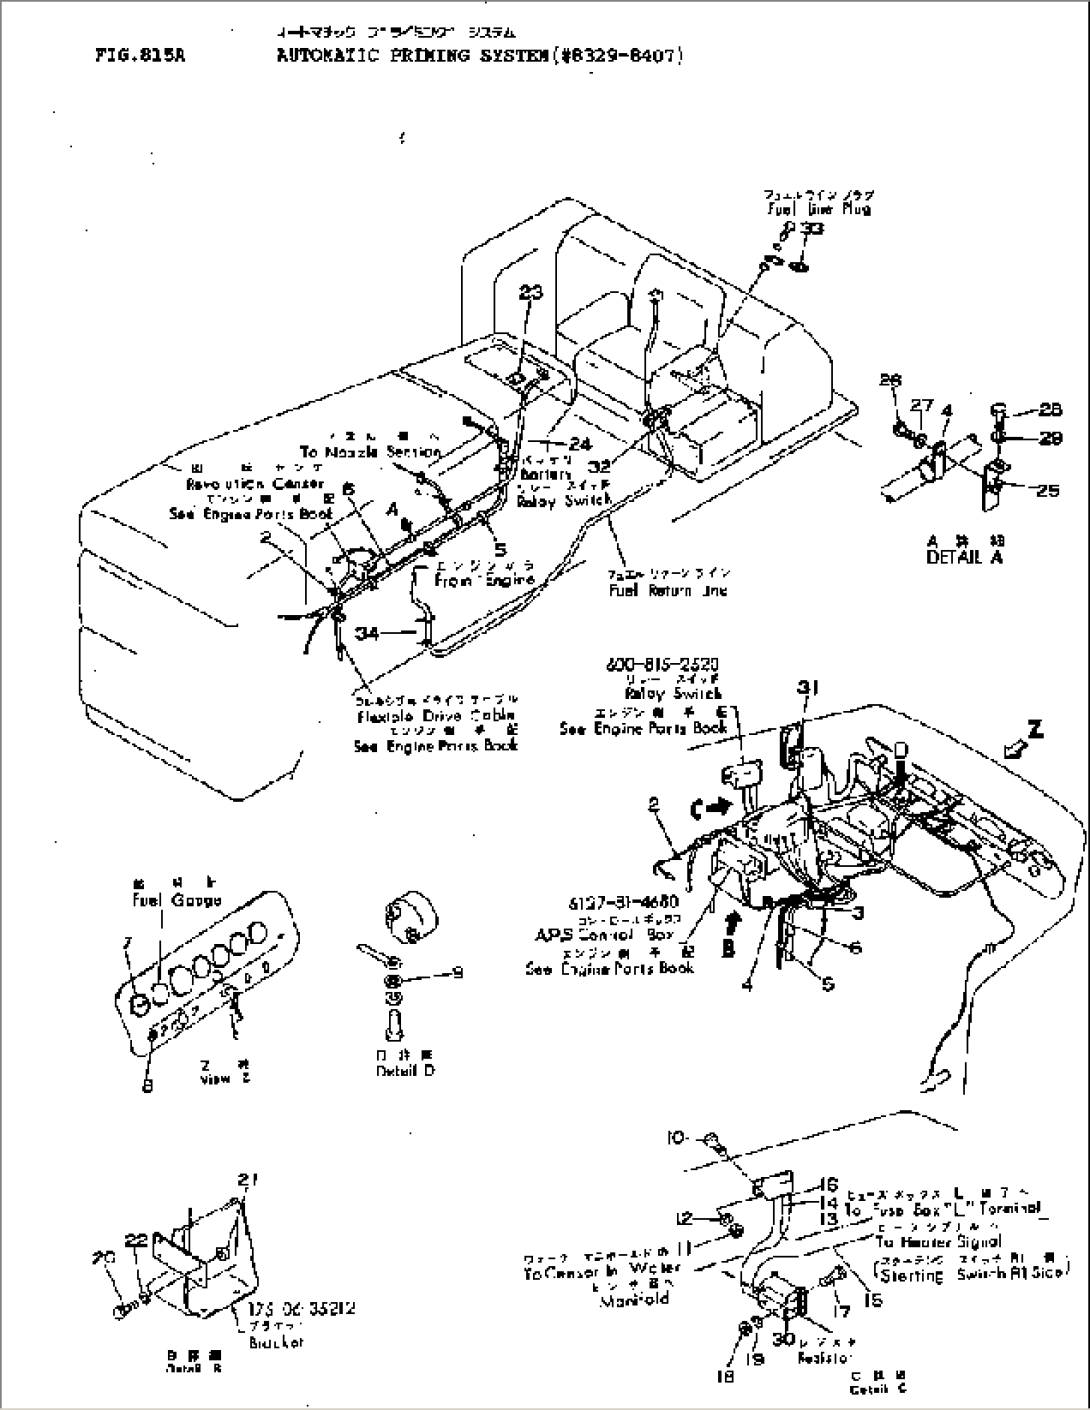 AUTOMATIC PRIMING SYSTEM(#8329-8407)